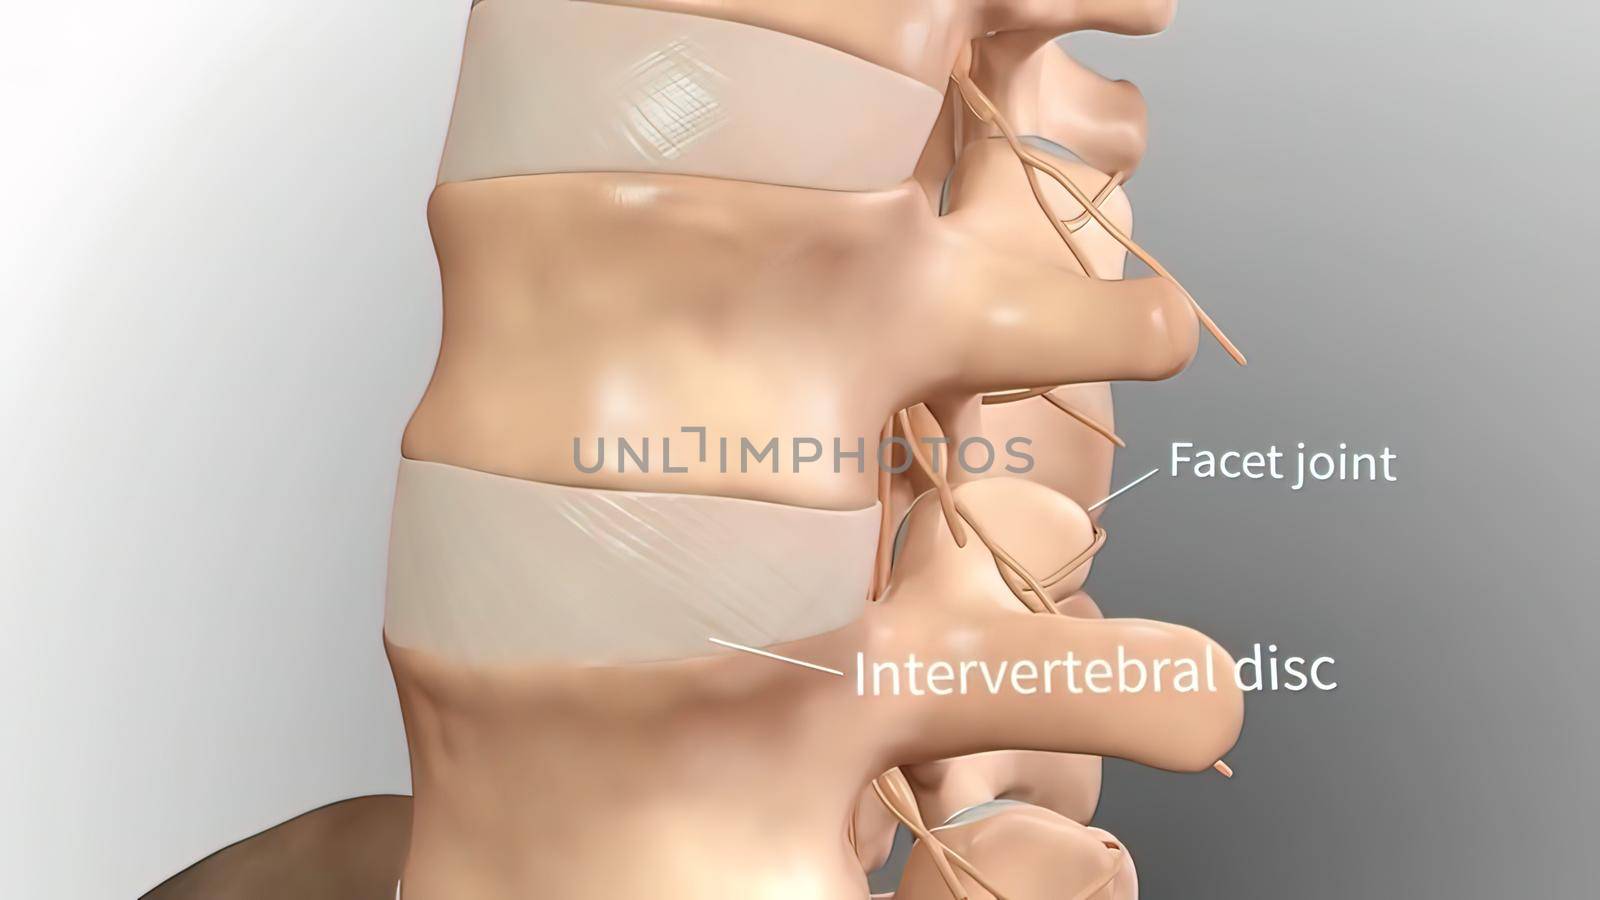 Chronic Low Back Pain. showing pain in the lower back 3D illustration